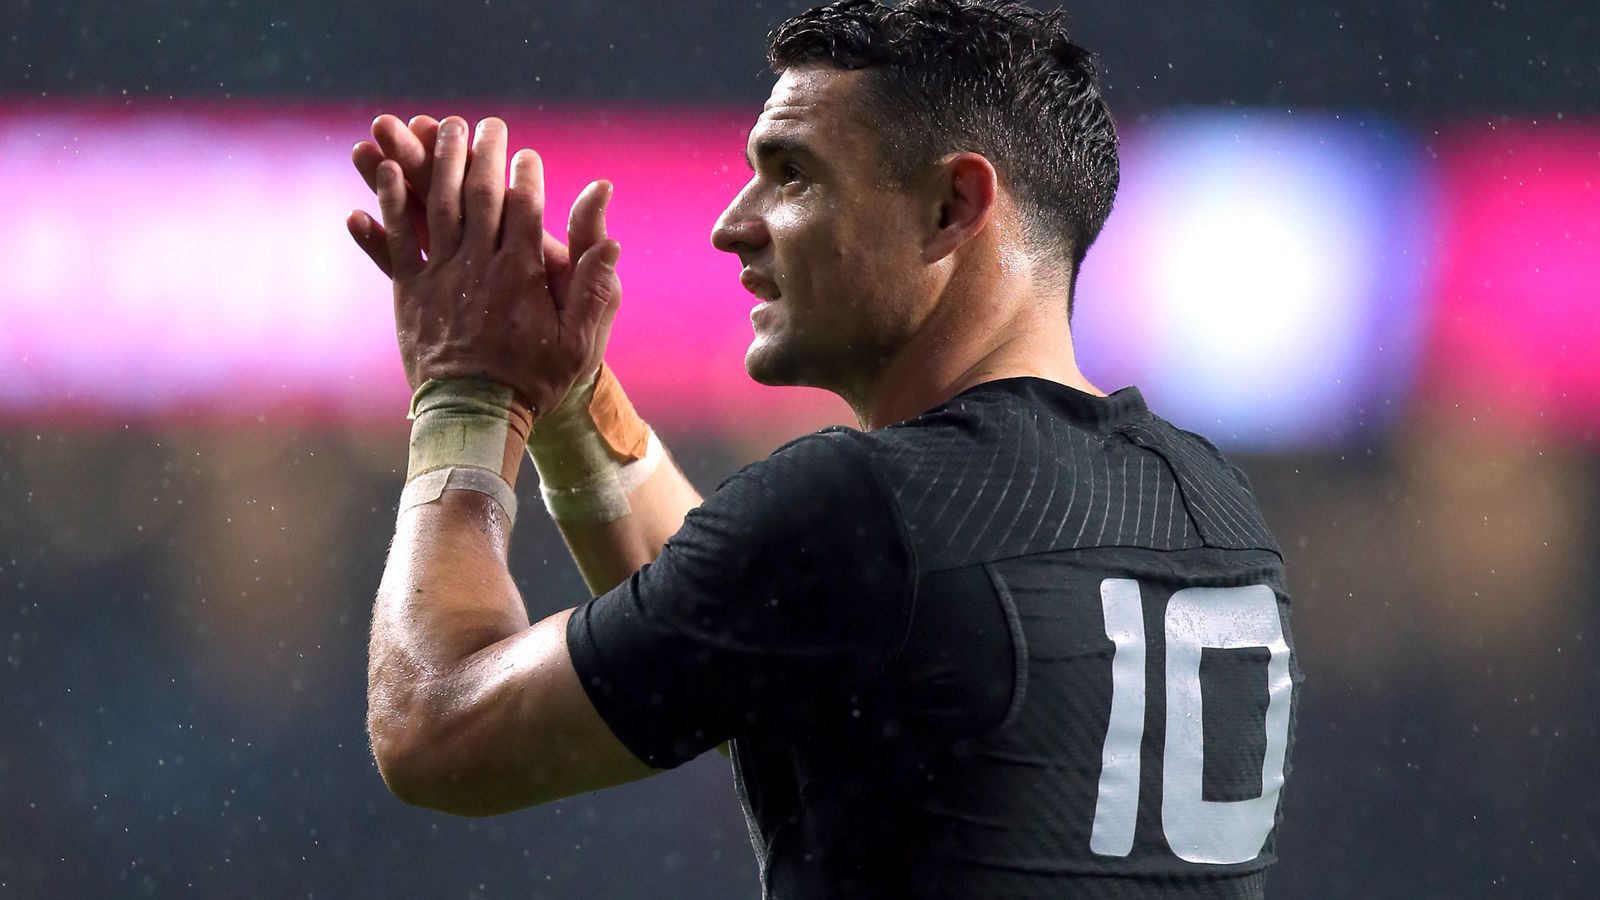 Dan Carter on X: Humbled to be invited to attend the